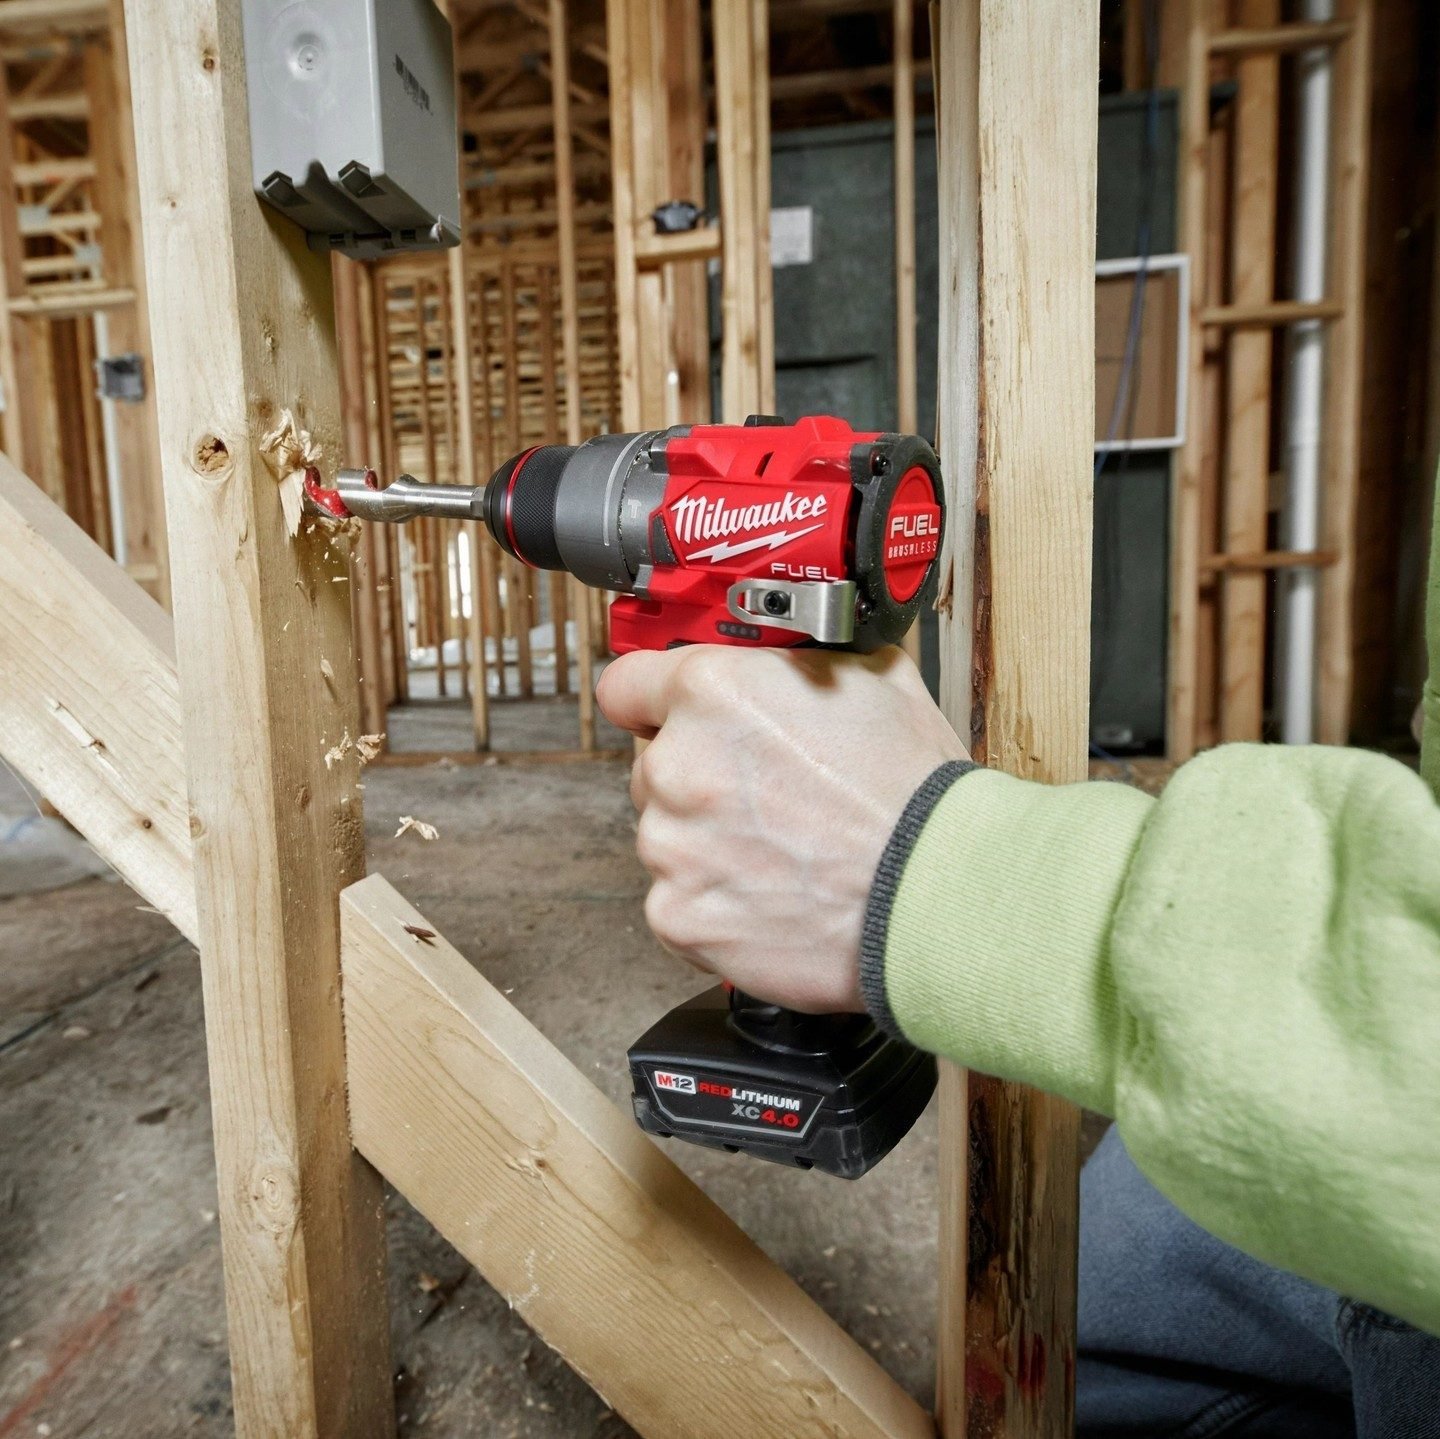 why is milwaukee tools so popular?